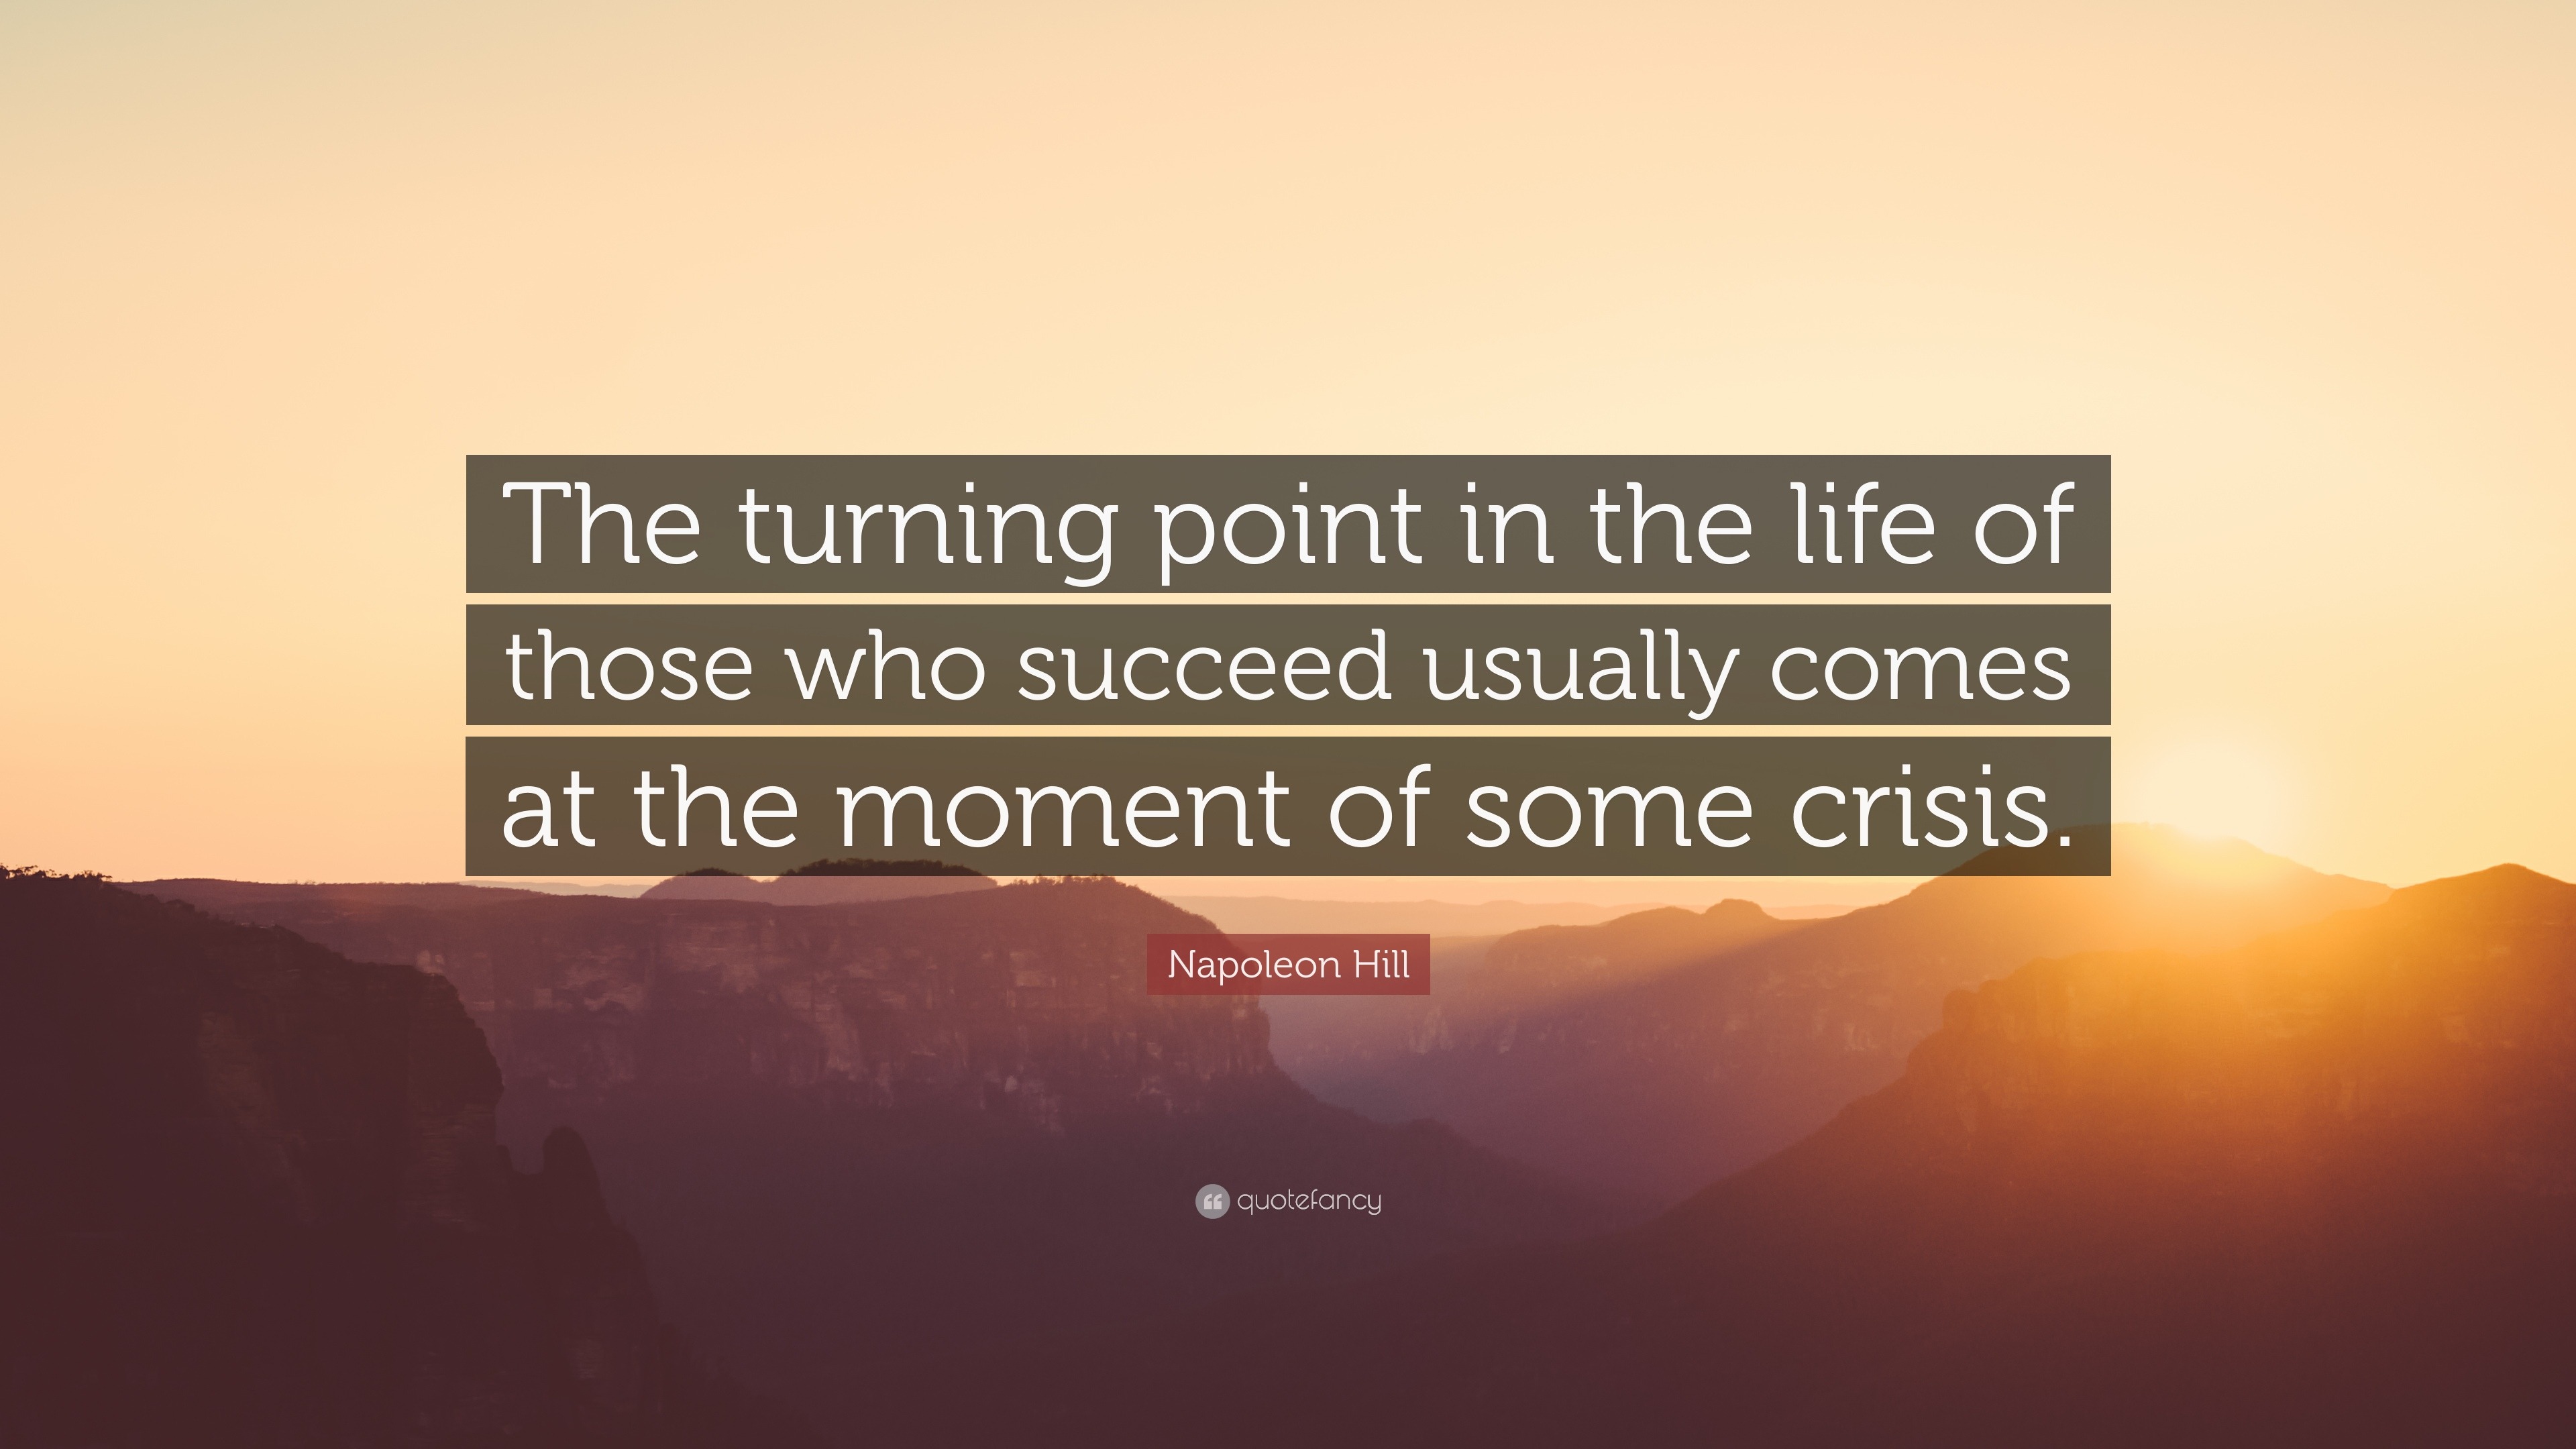 Napoleon Hill Quote The Turning Point In The Life Of Those Who Succeed Usually Comes At The Moment Of Some Crisis 12 Wallpapers Quotefancy